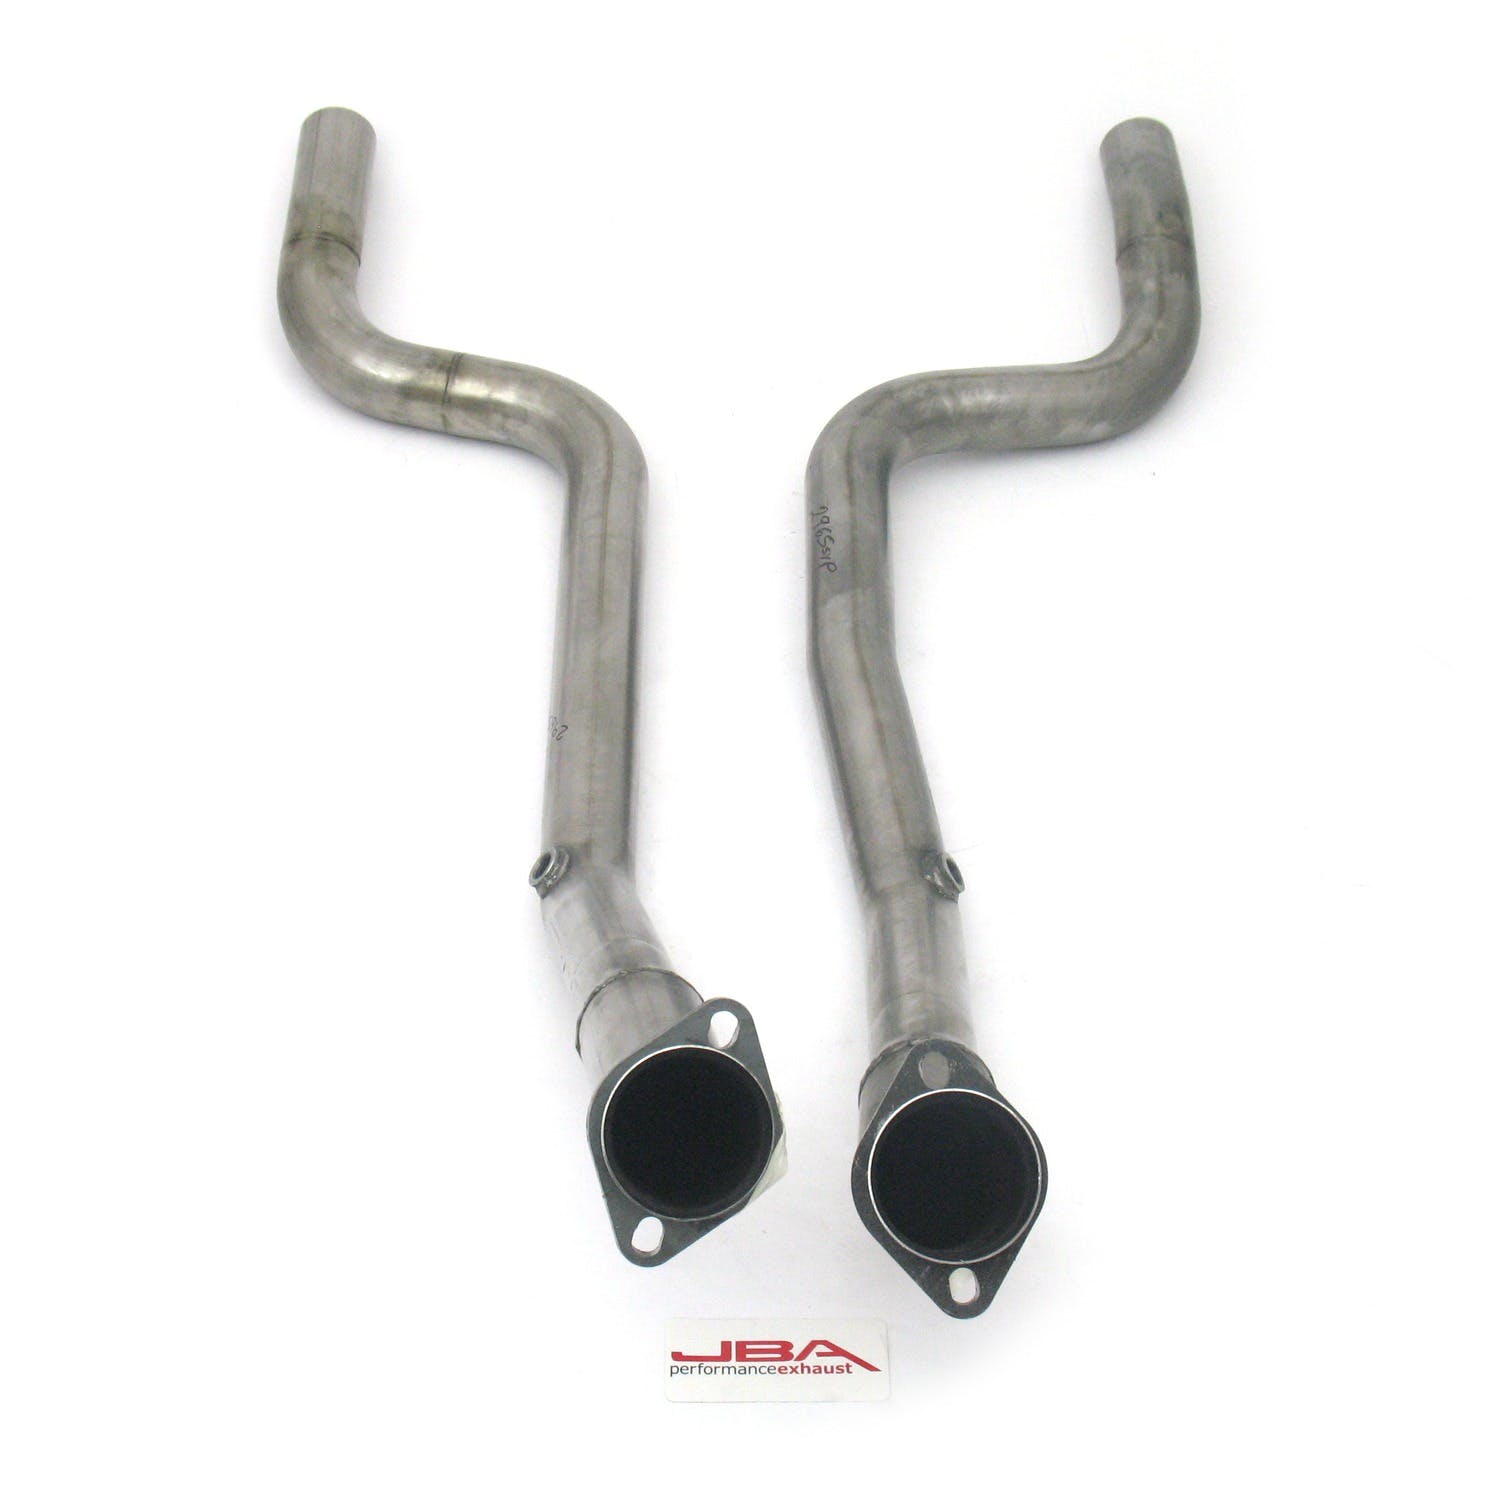 JBA Performance Exhaust 2965SY 2965SY 2.5 inch Stainless Steel Mid-Pipe 05-12 5.7L Hemi Car